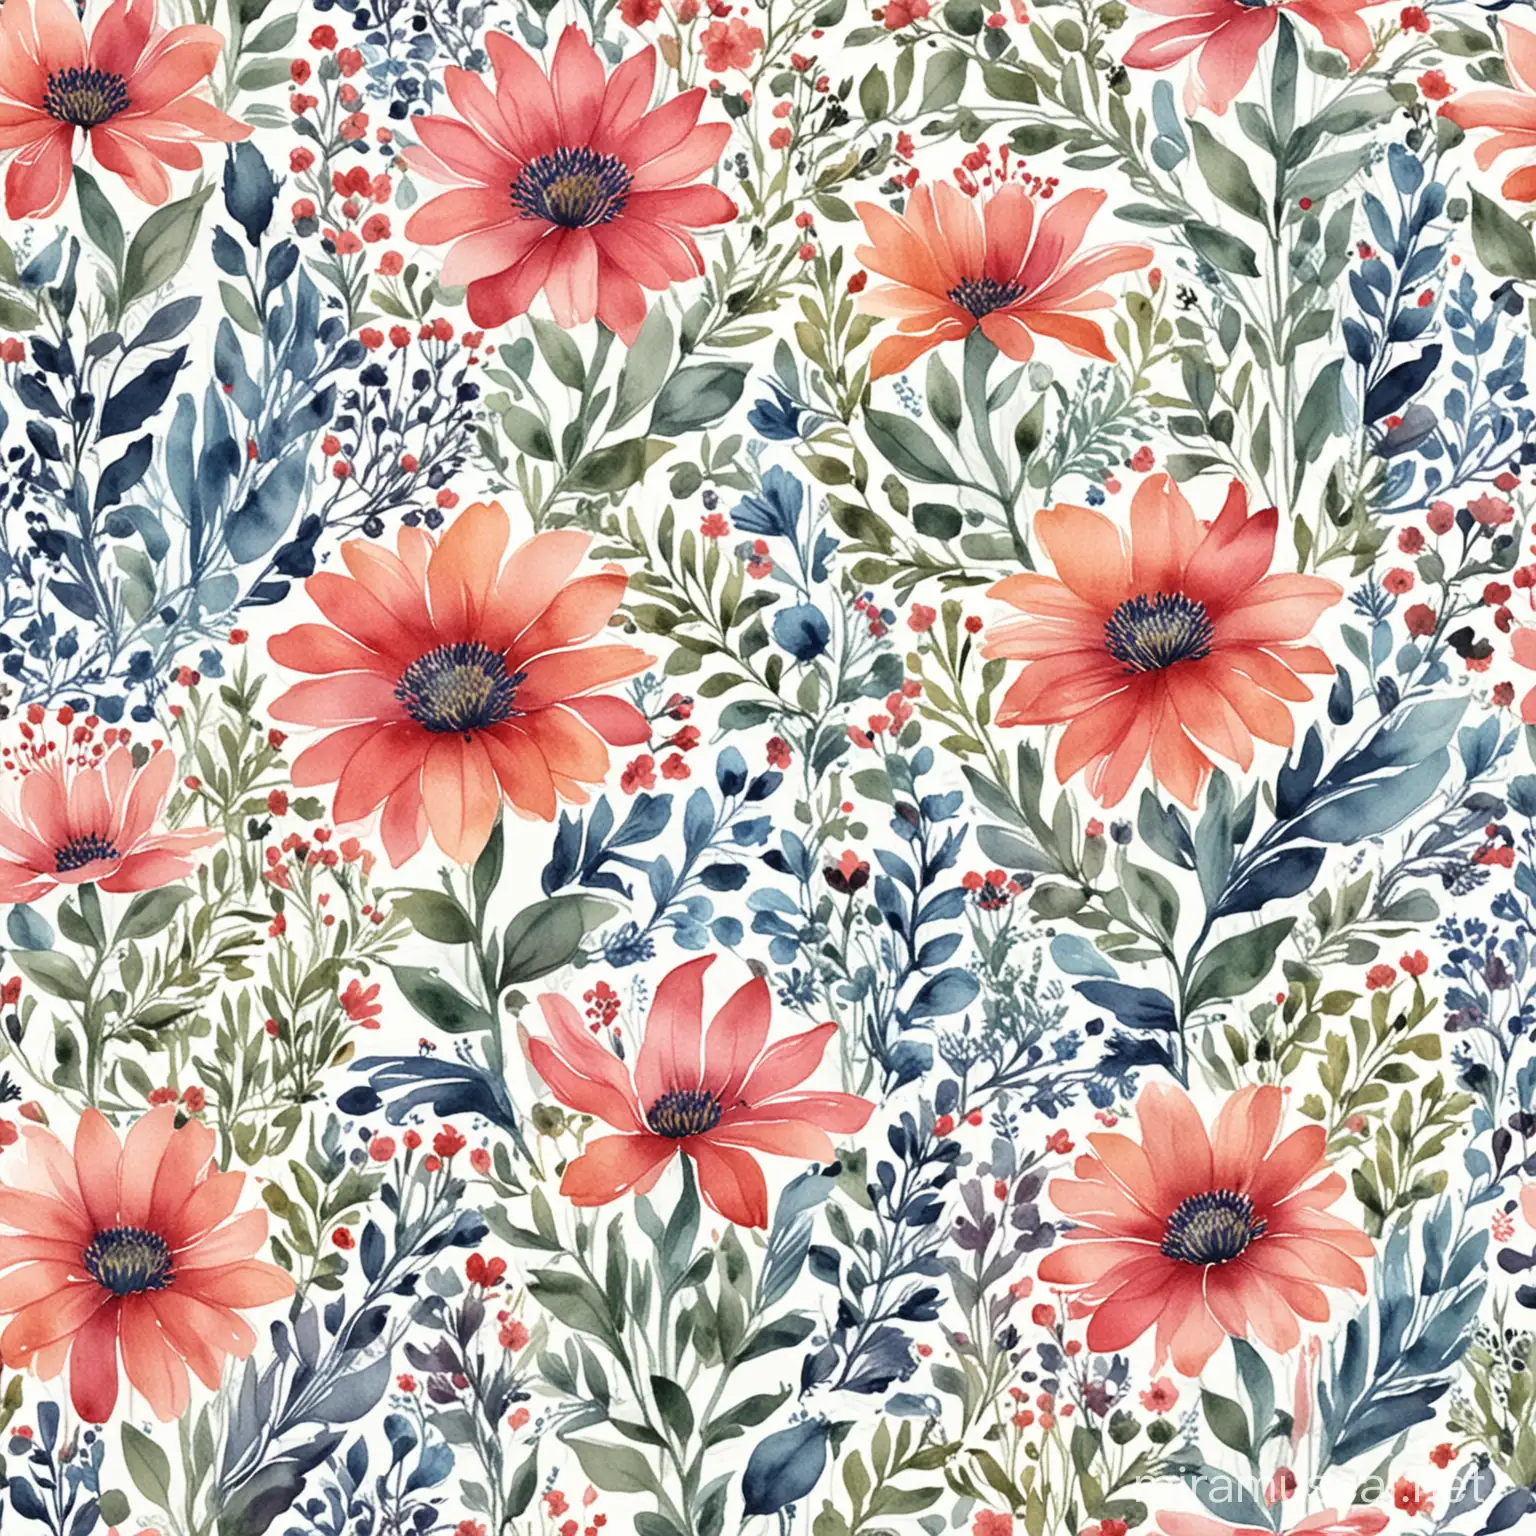 Watercolor flower pattern with white background. Liberty prints style.